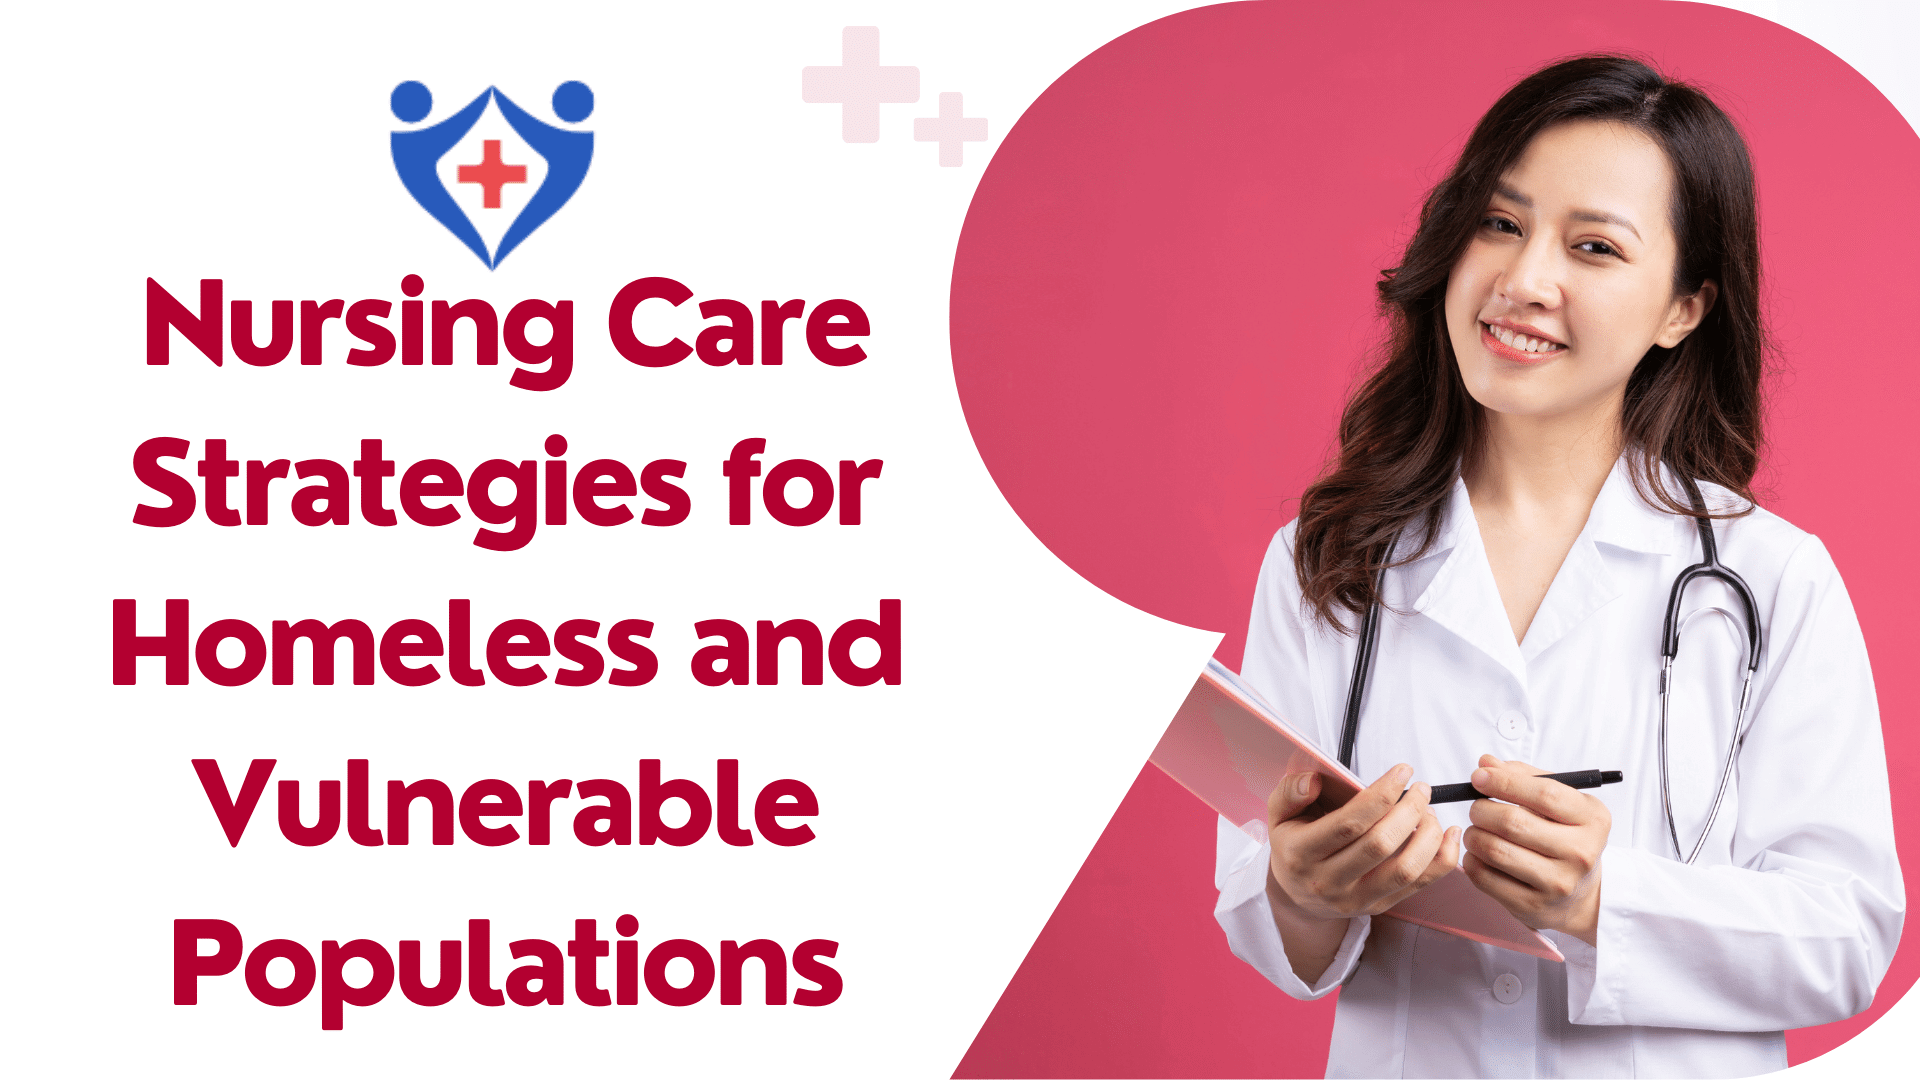 Nursing Care Strategies for Homeless and Vulnerable Populations